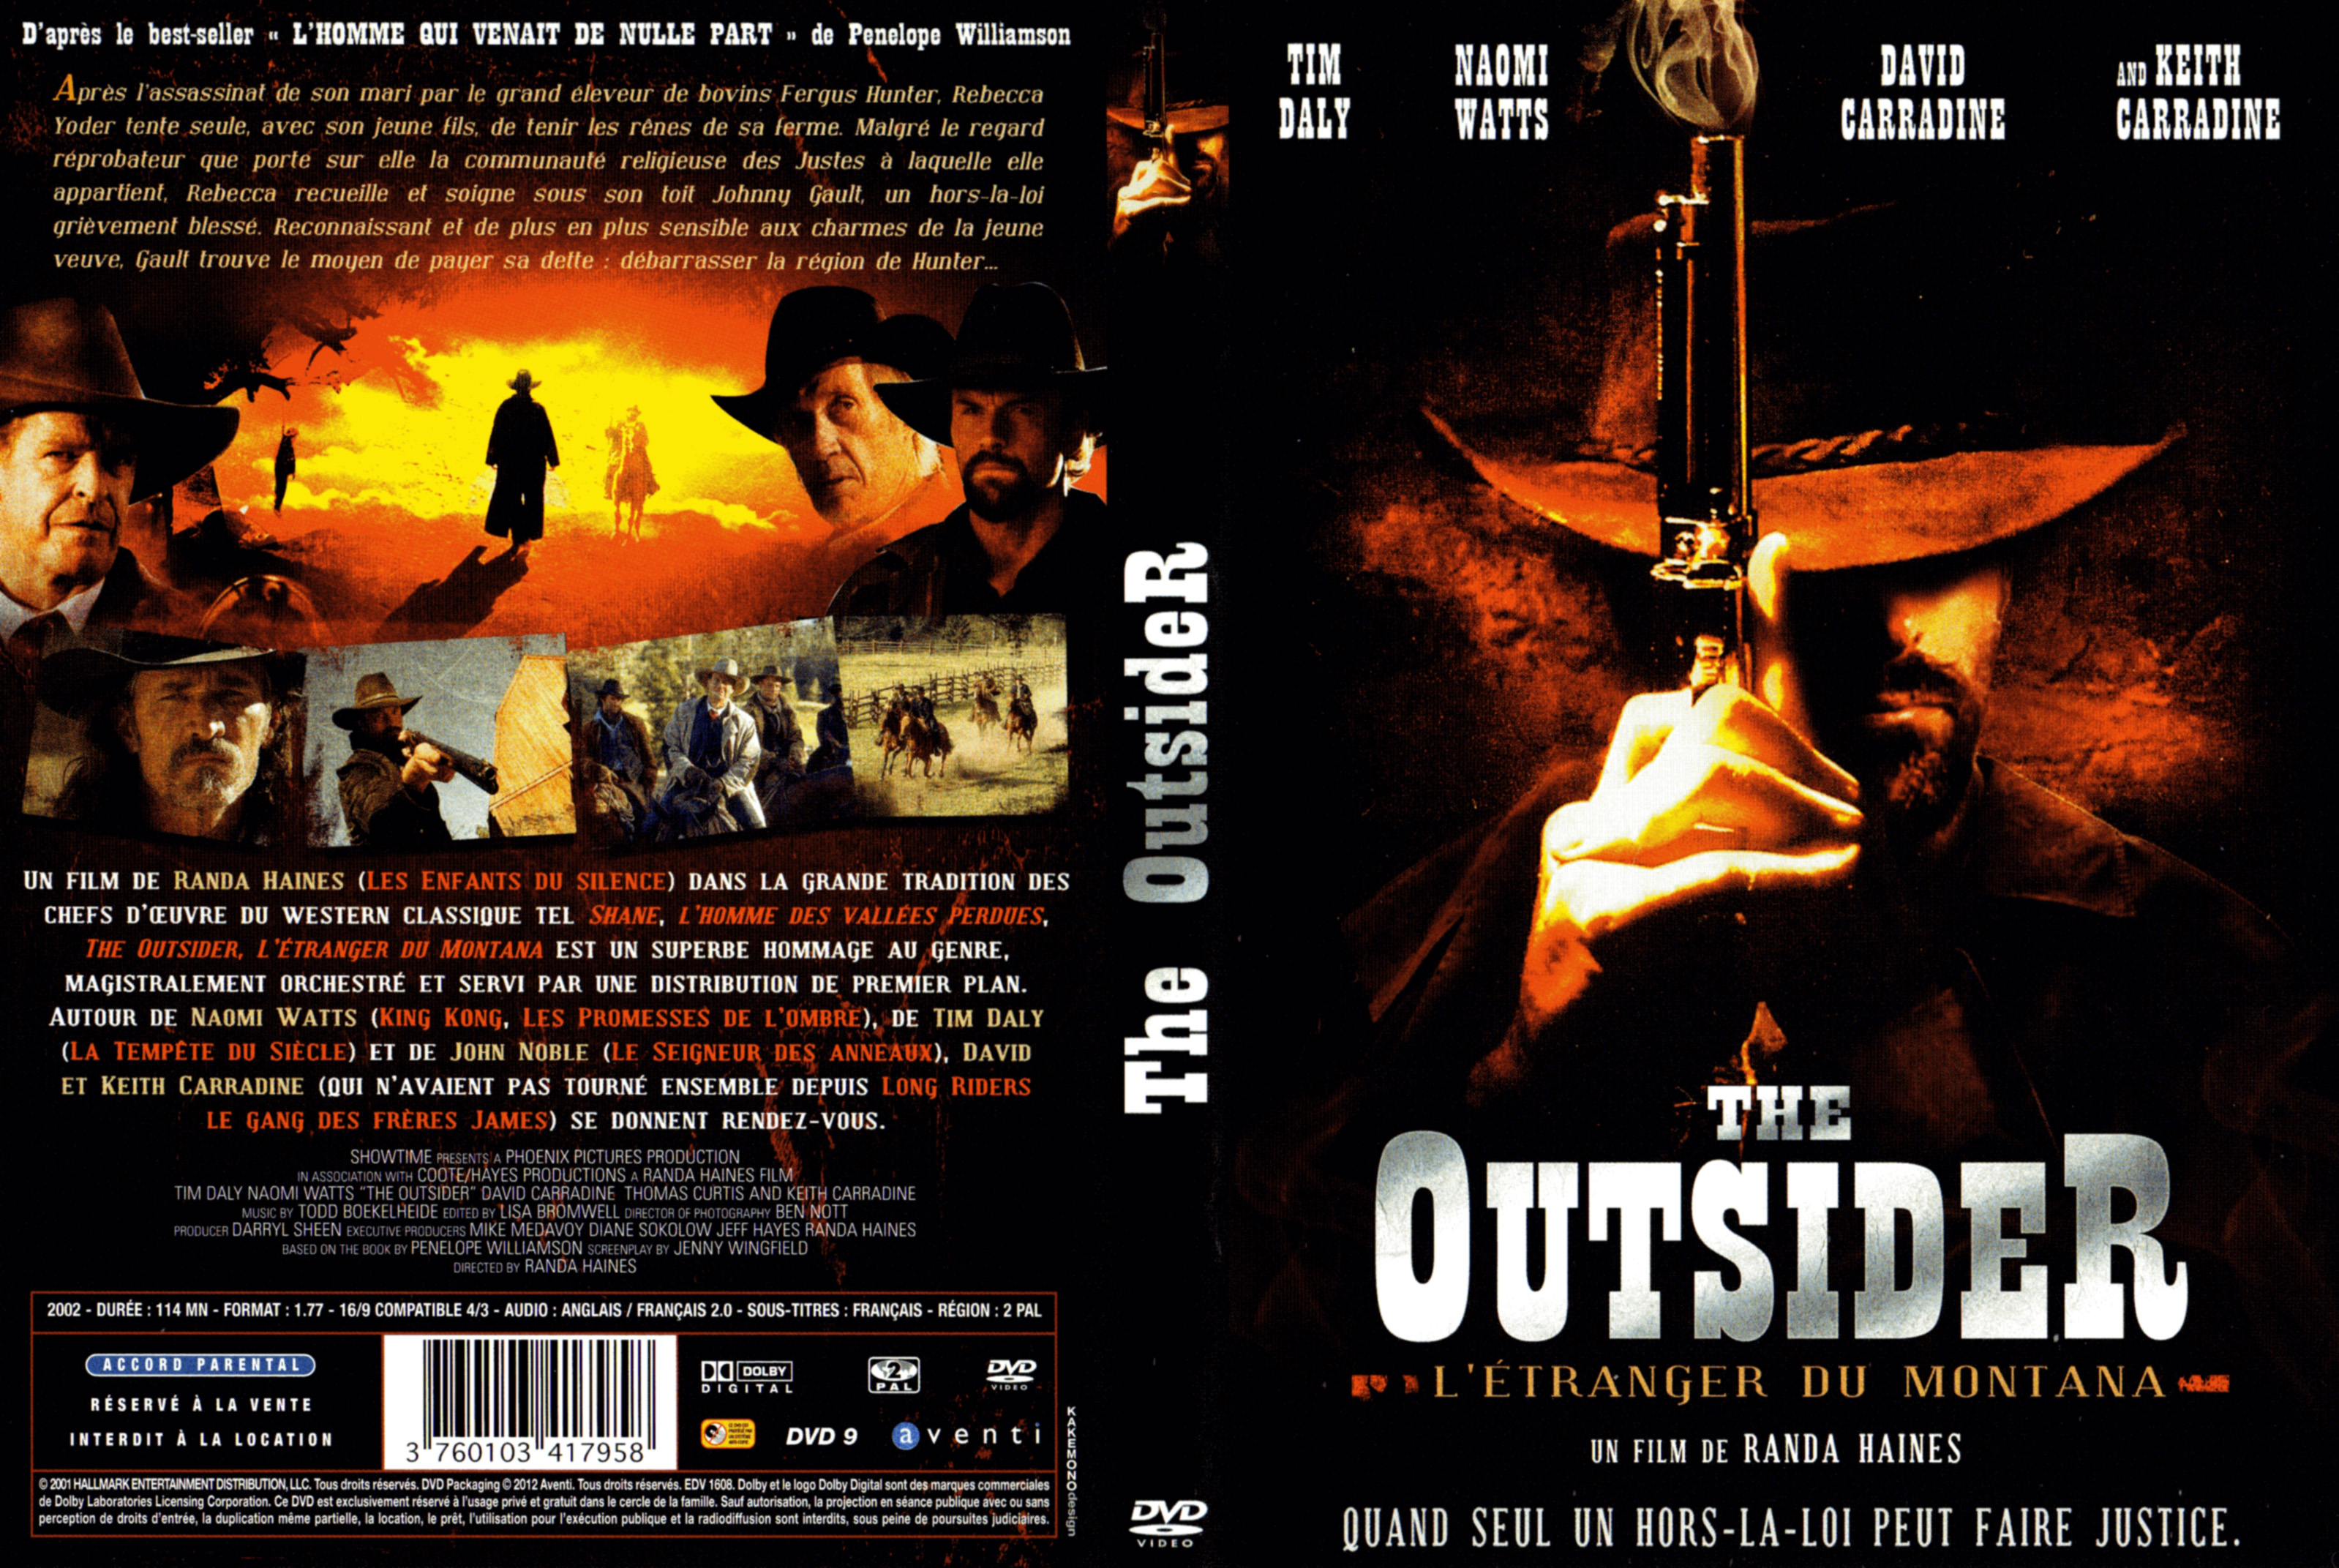 Jaquette DVD The outsider